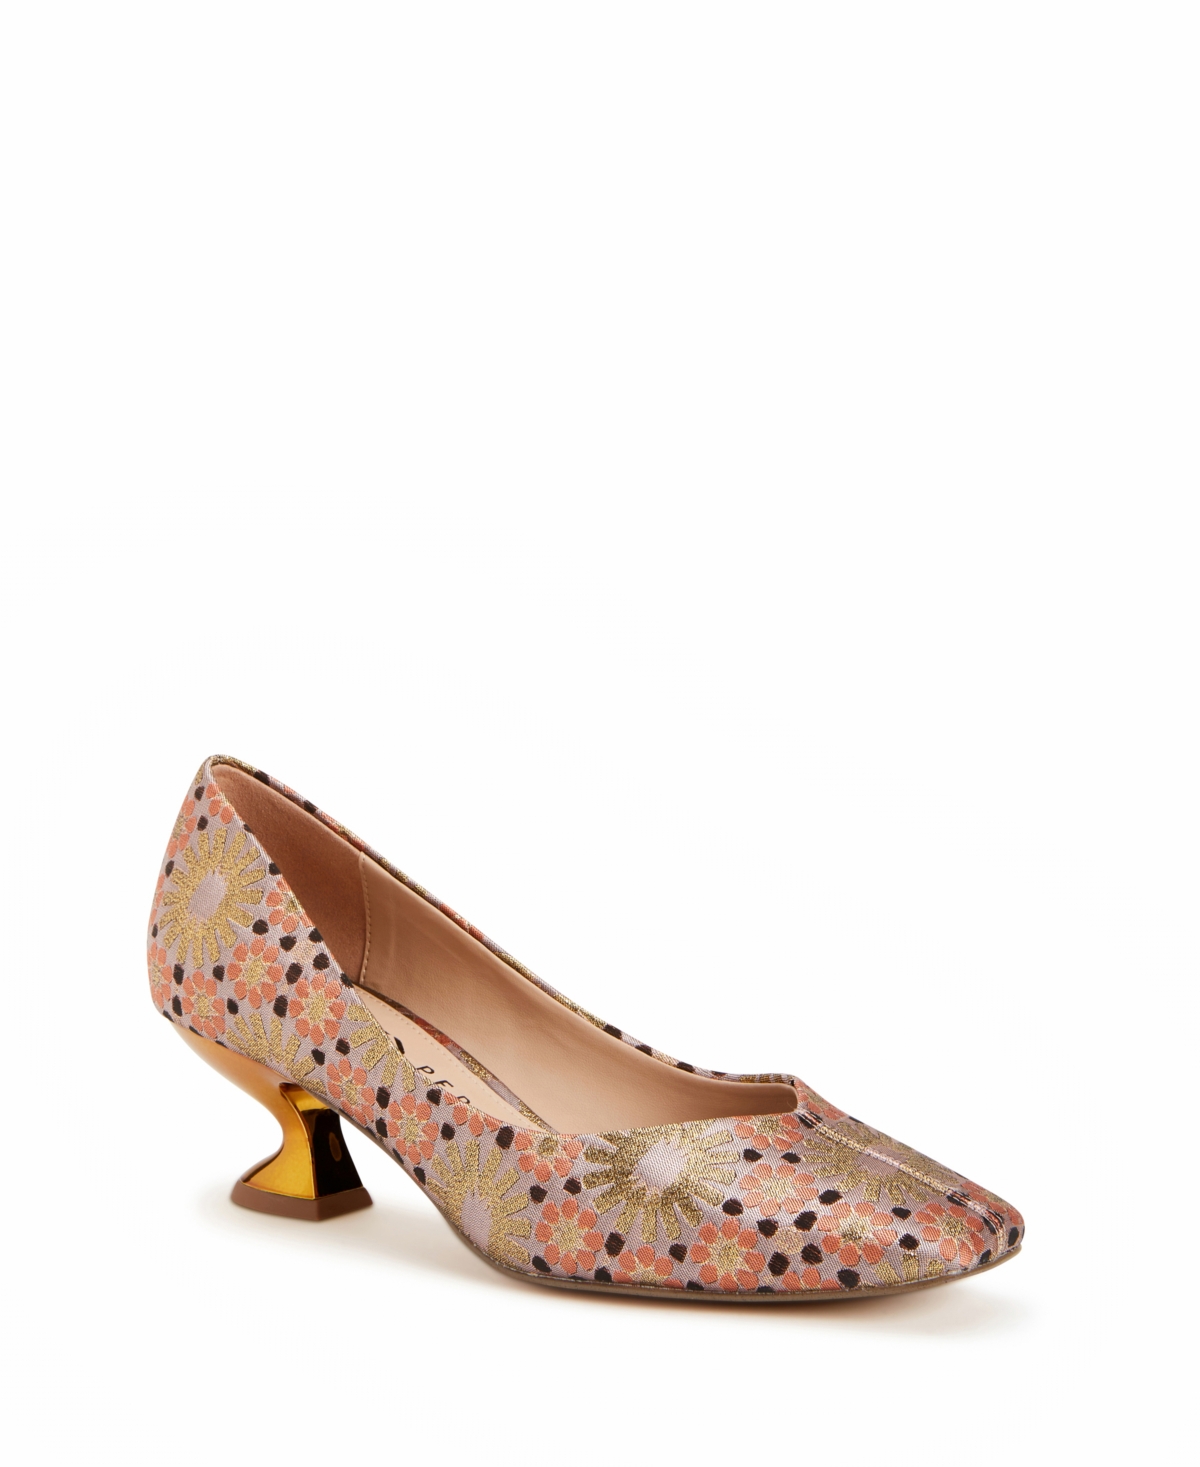 Katy Perry Women's The Laterr Pumps Women's Shoes